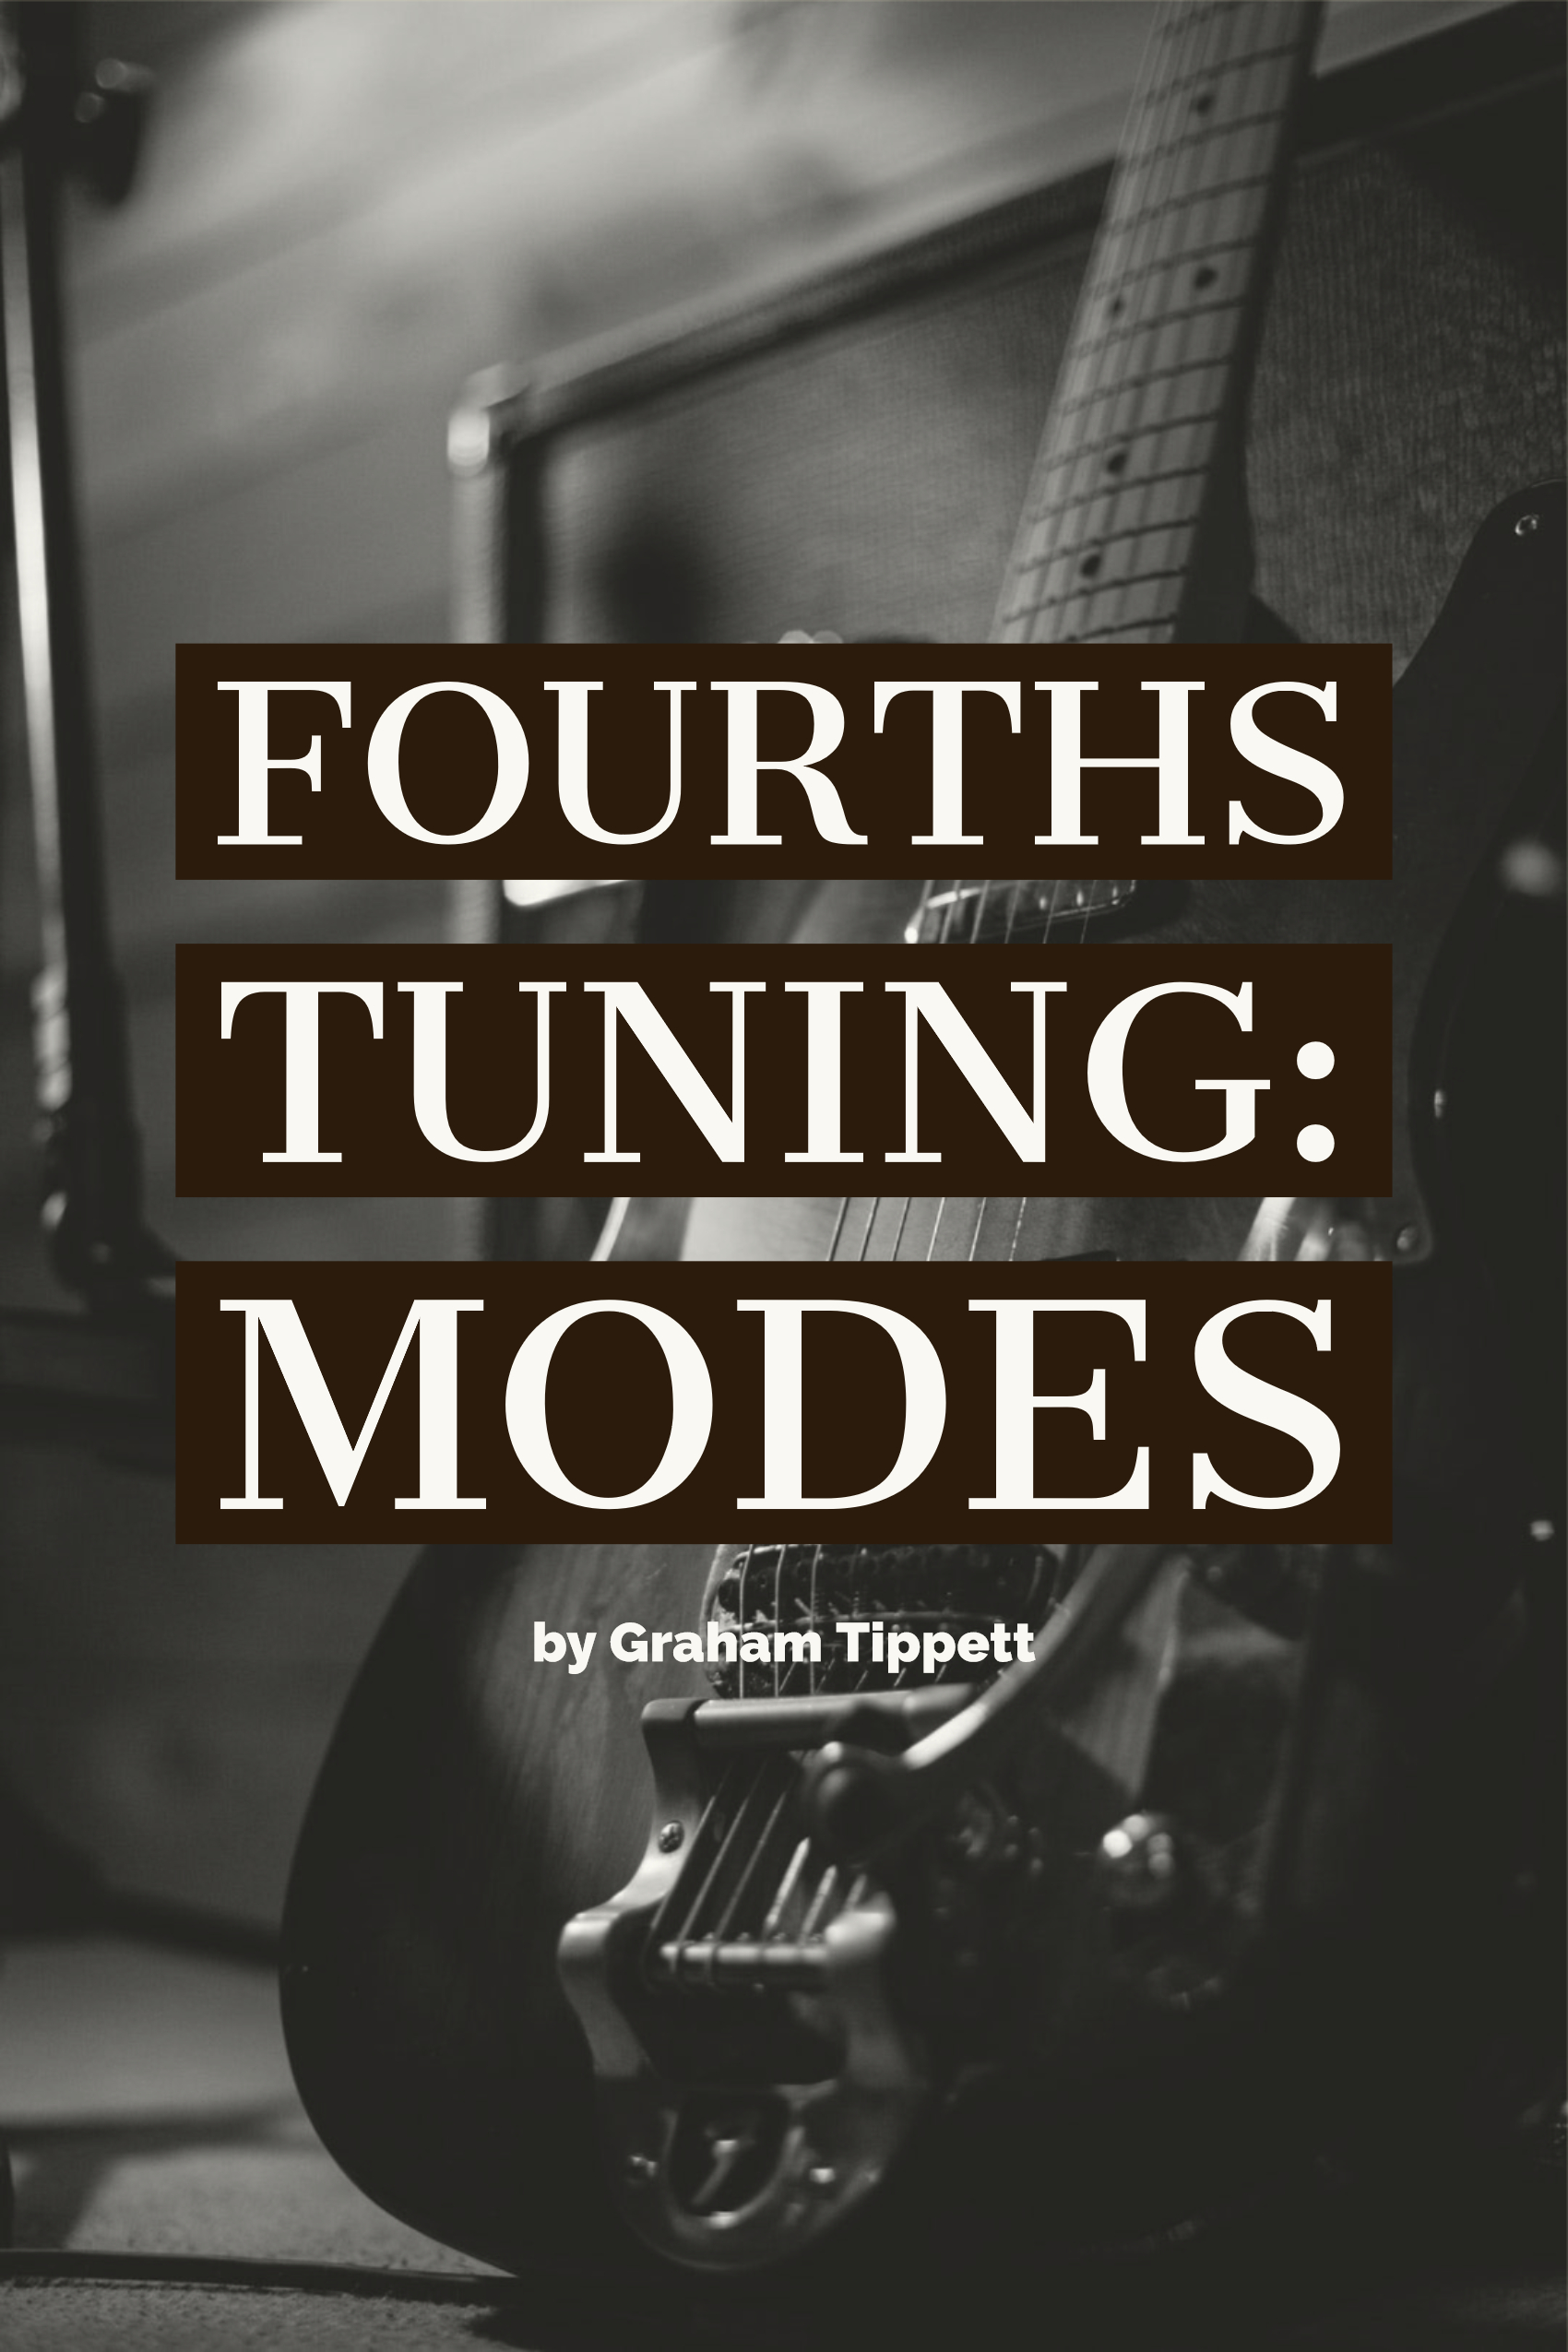 fourths tuning modes